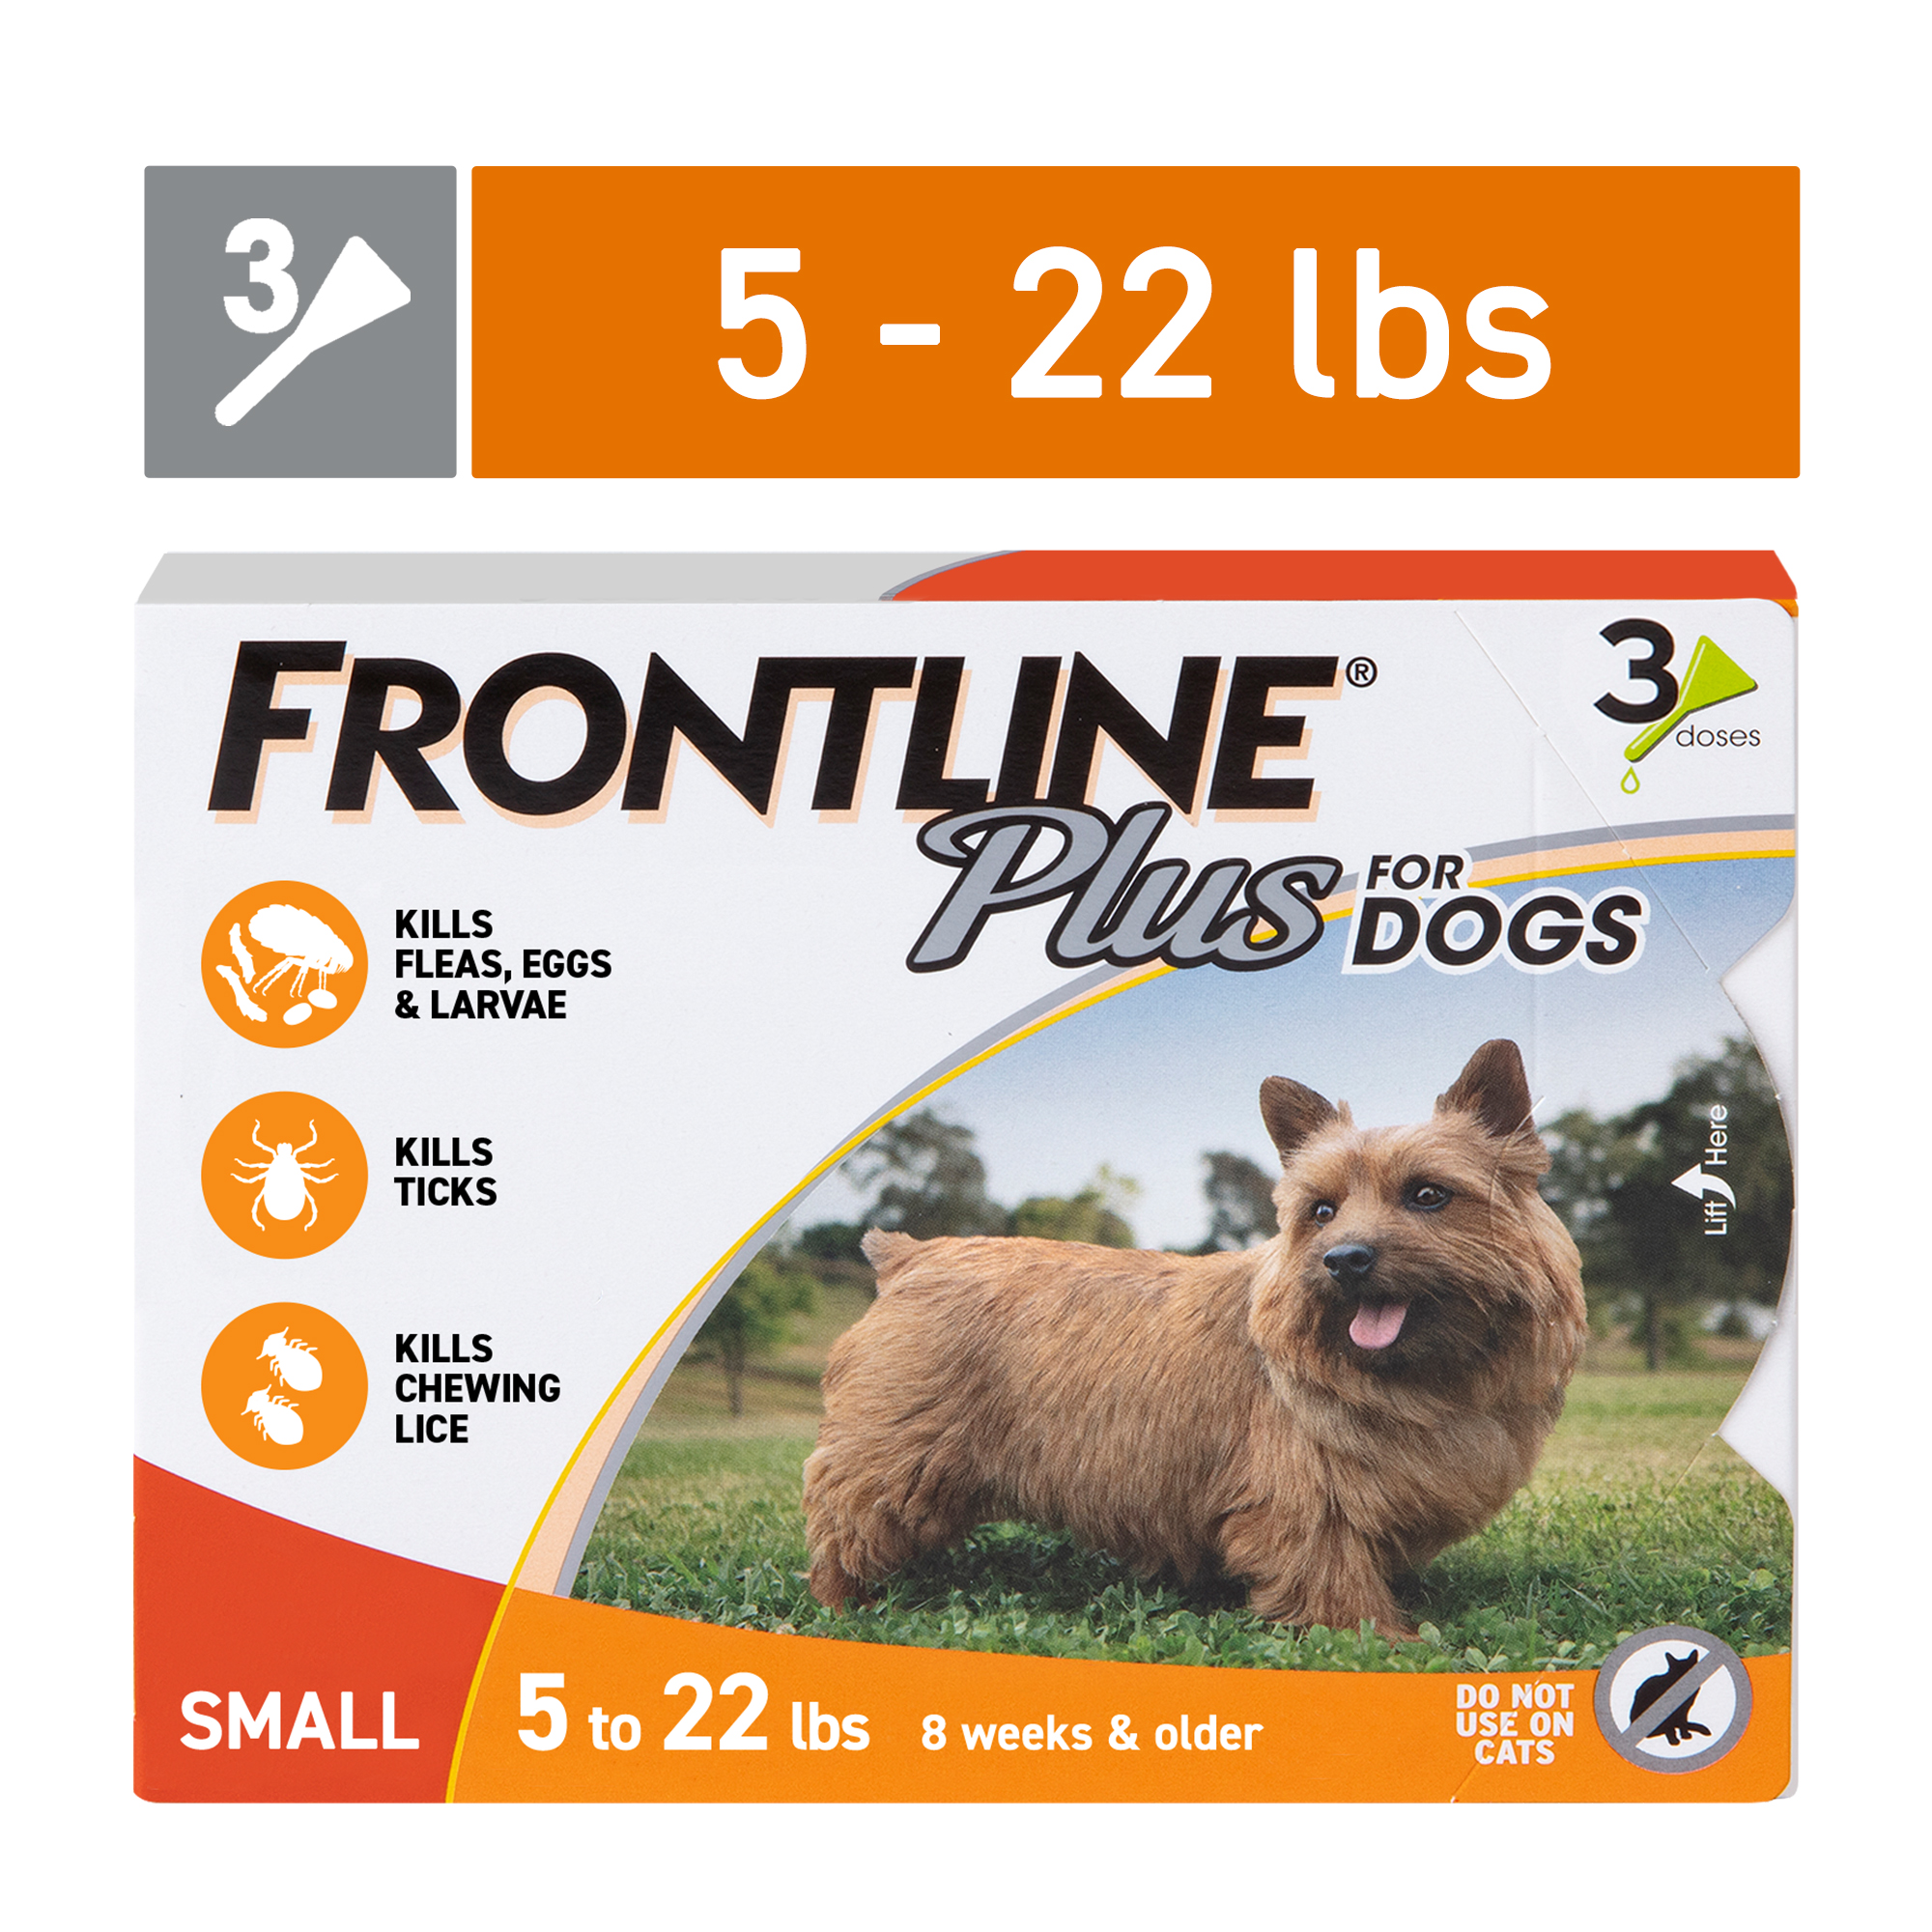 FRONTLINE® Plus for Dogs Flea and Tick Treatment, Small Dog, 5-22 lbs, Orange Box, 3 CT - image 1 of 11